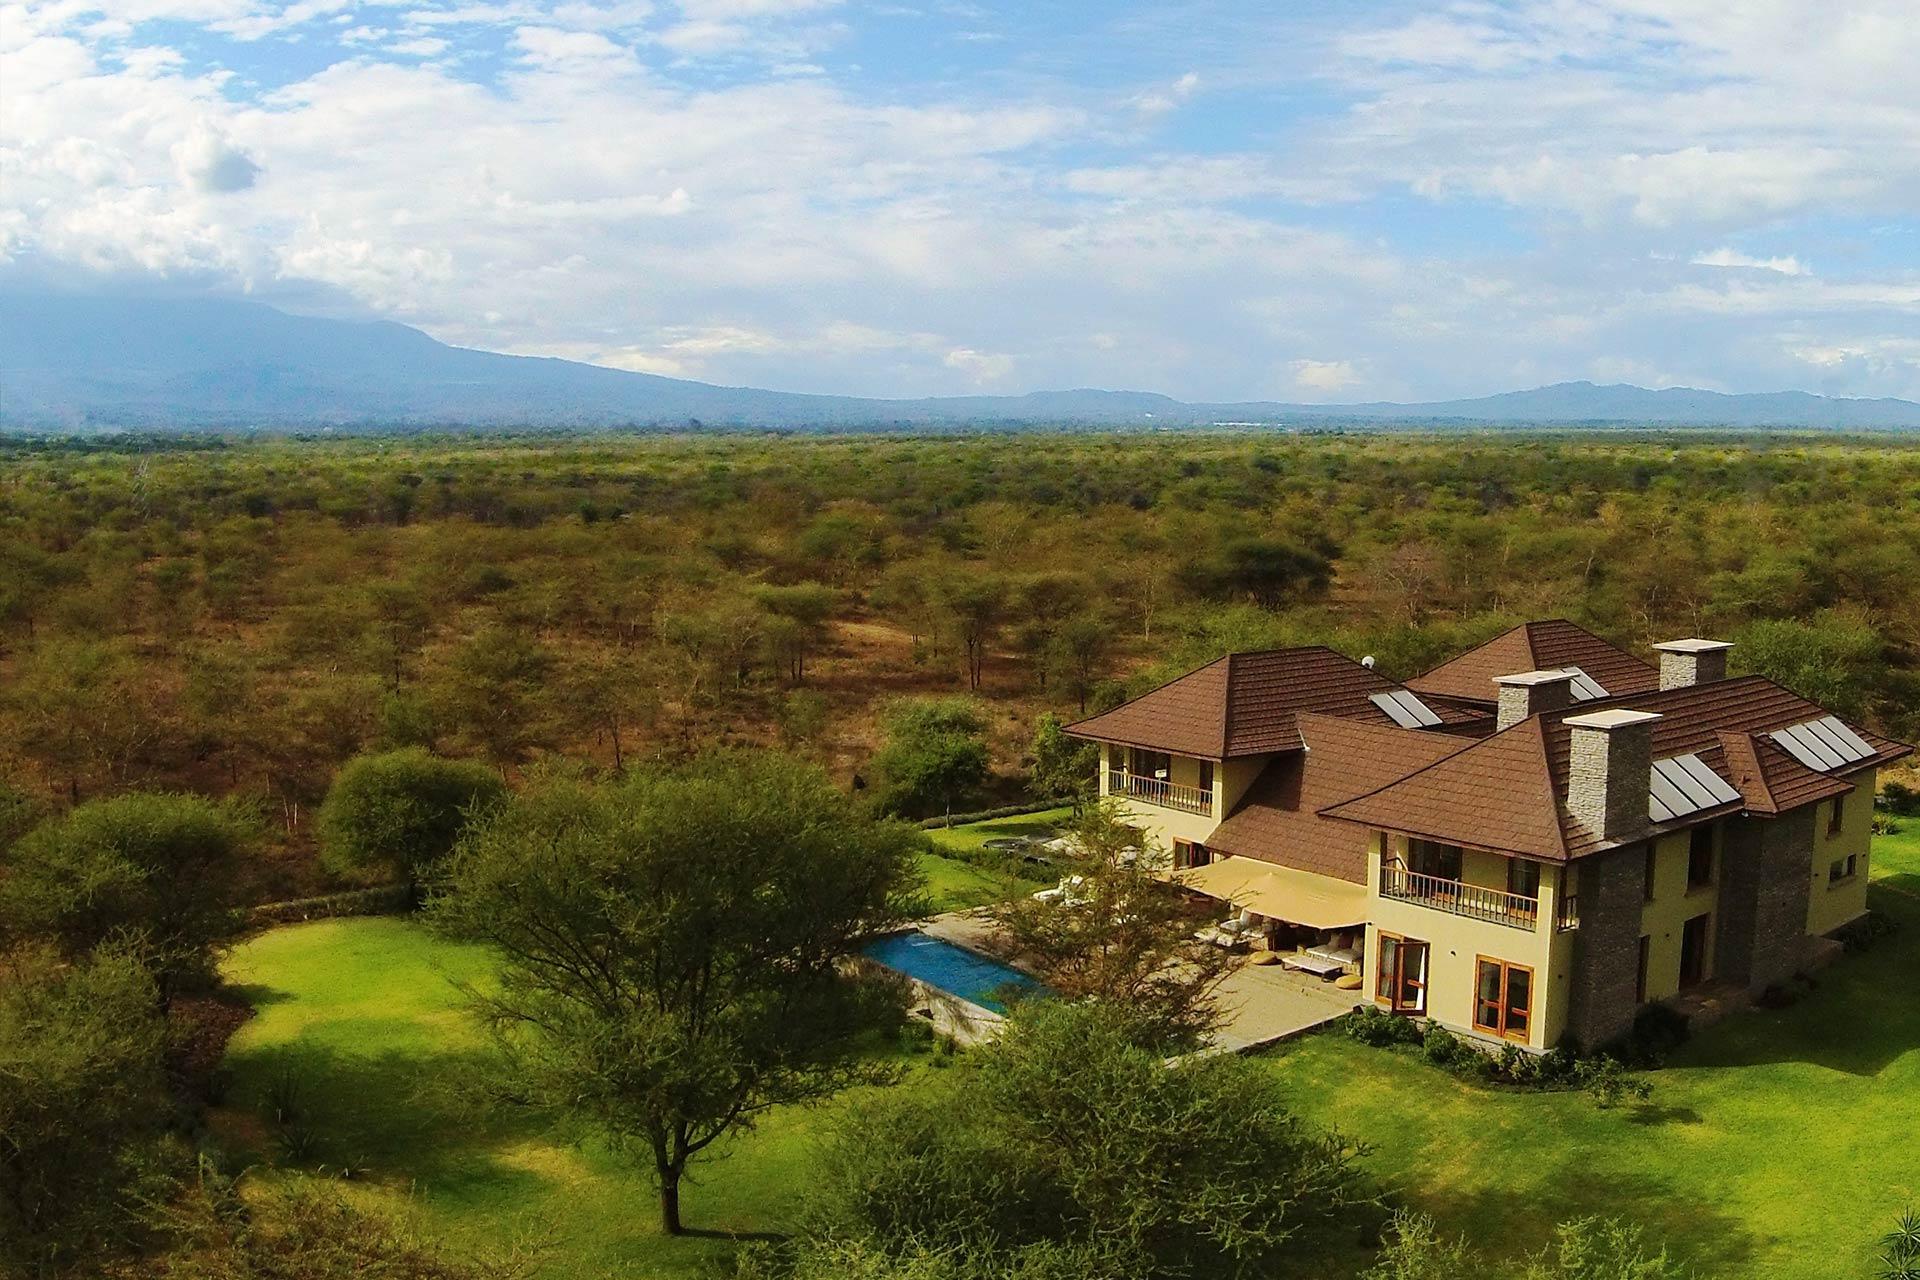 Siringit Villa is located in the surrounds of the Kilimanjaro Golf and Wildlife Estate